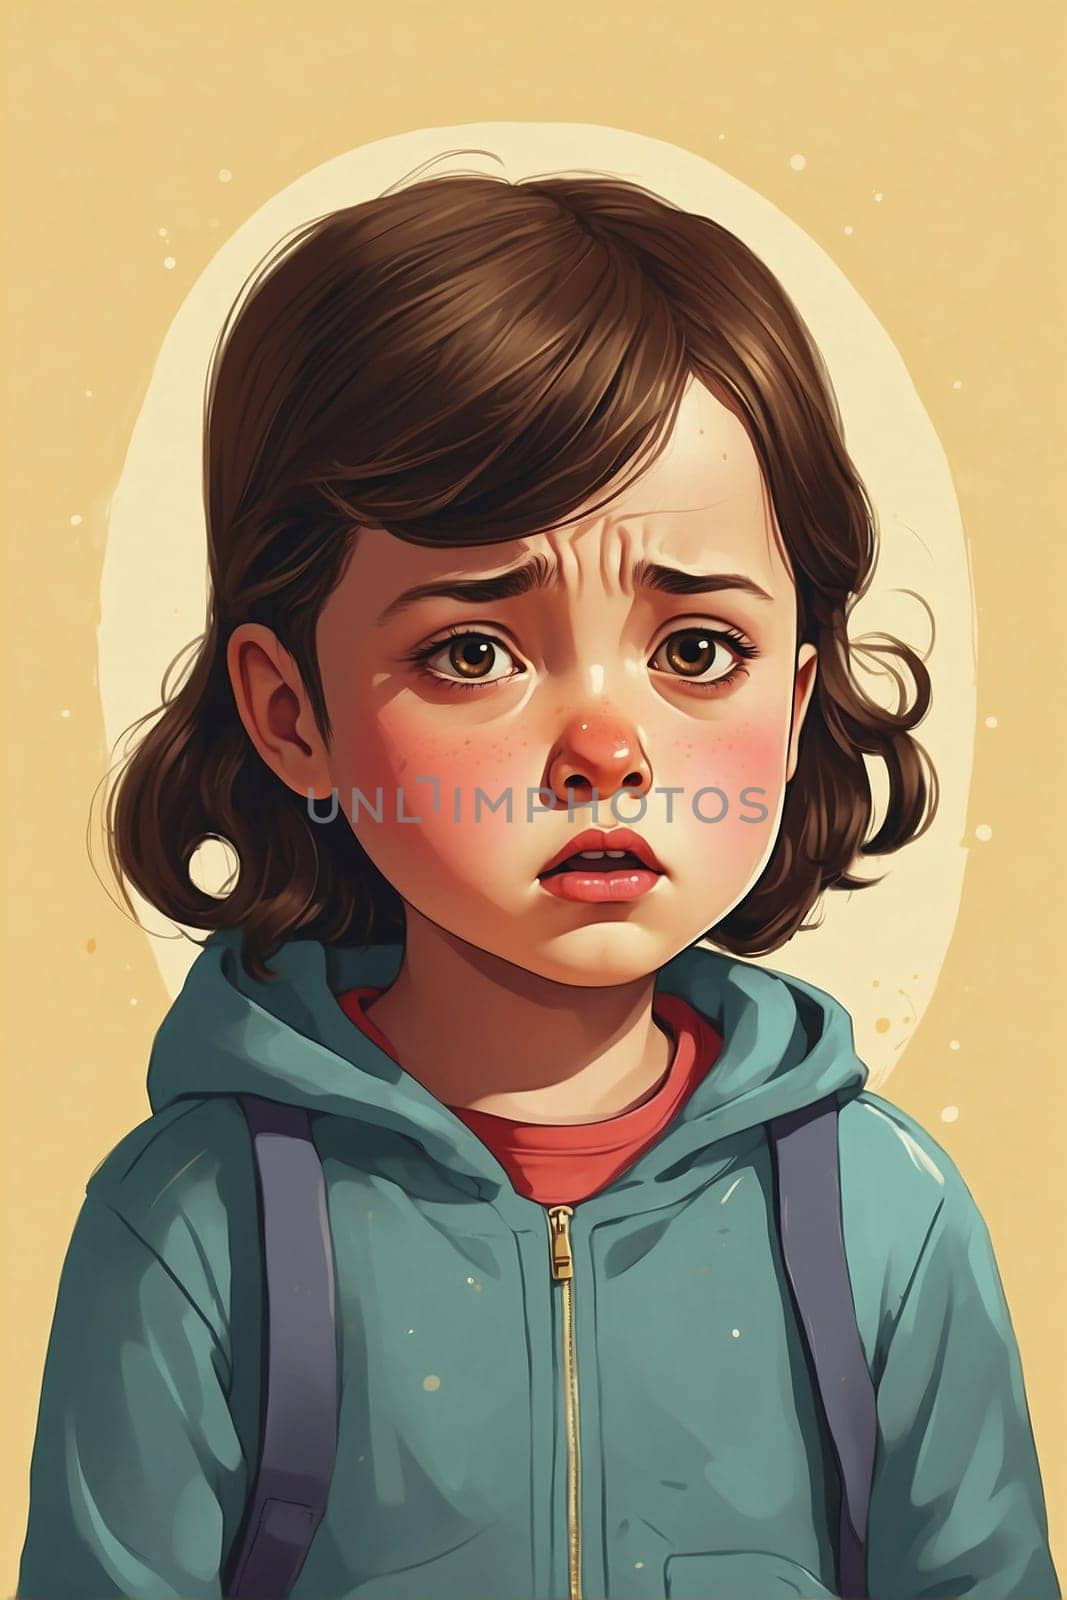 An emotional artwork depicting a young girl with a sad expression on her face.